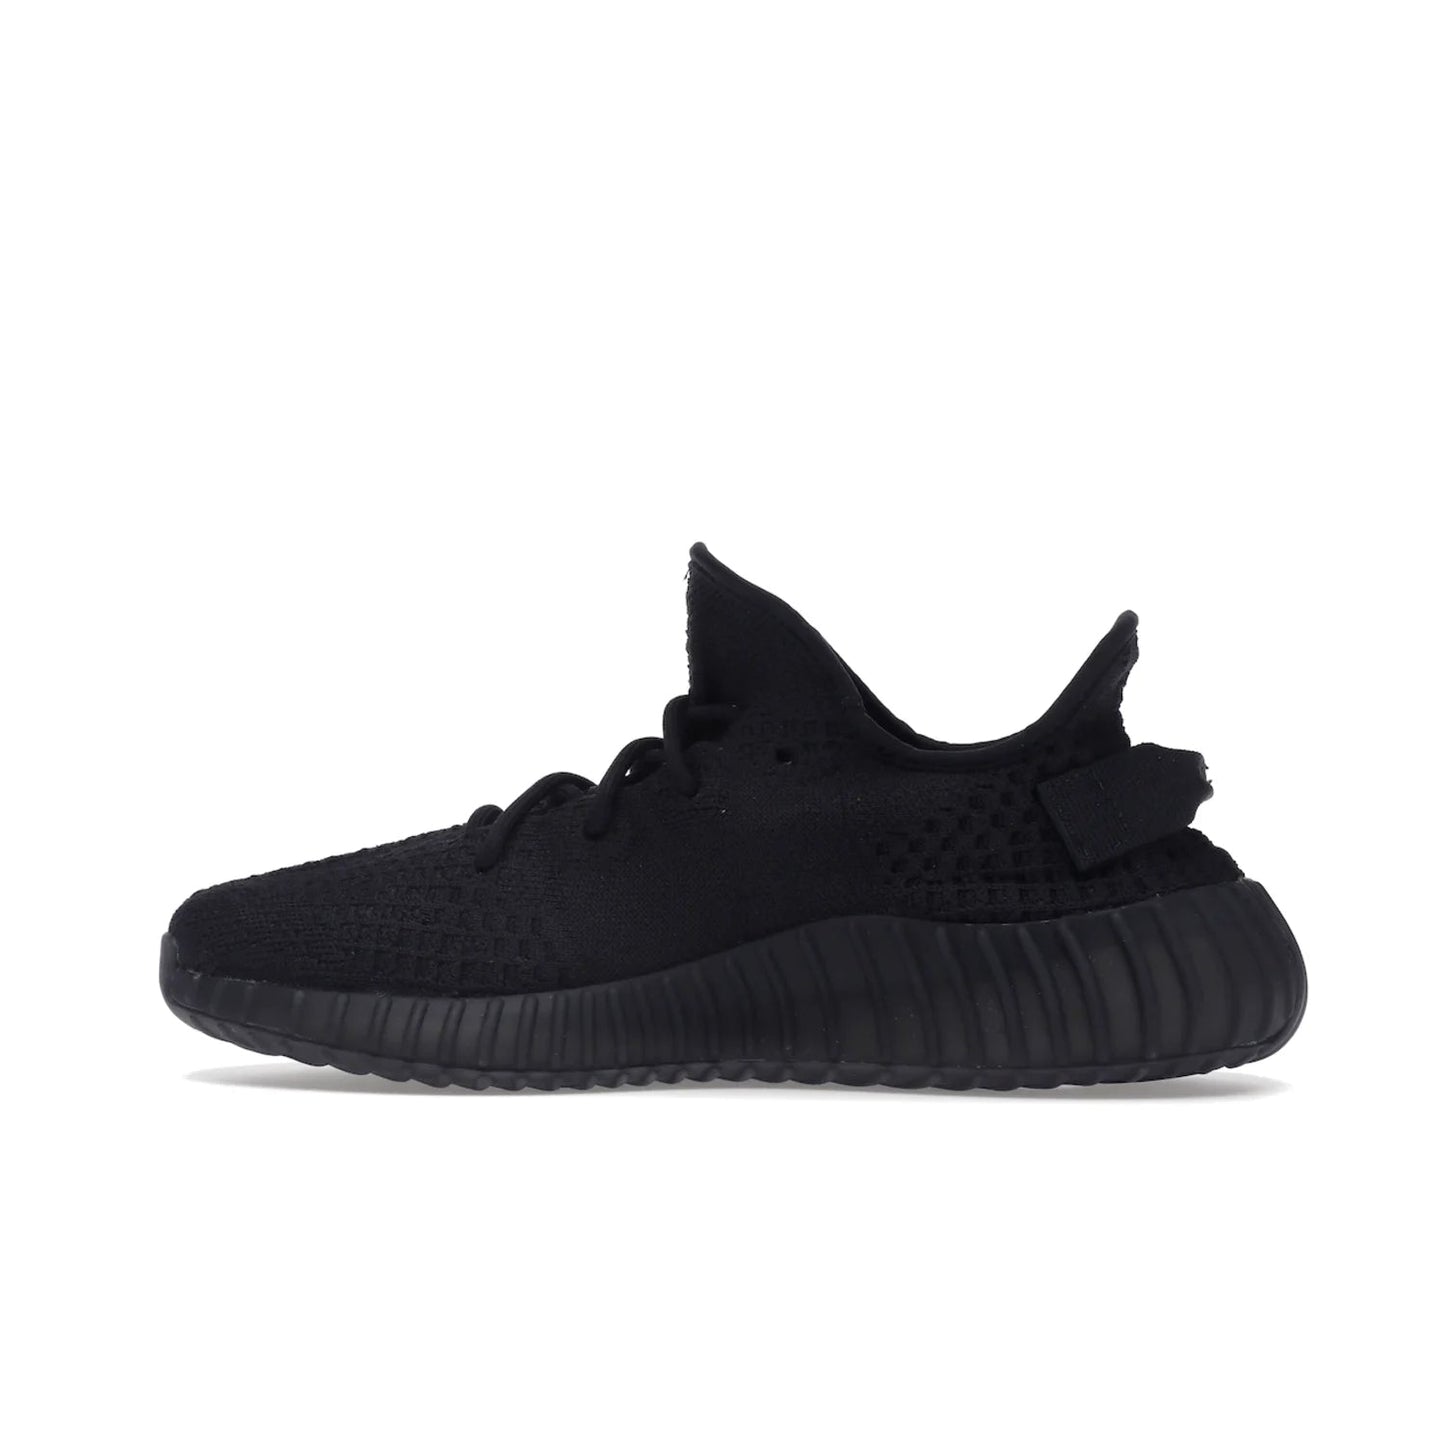 adidas Yeezy Boost 350 V2 Onyx - Image 20 - Only at www.BallersClubKickz.com - Adidas Yeezy Boost 350 V2 Onyx Triple Black shoes for comfort and style. Arriving Spring 2022.